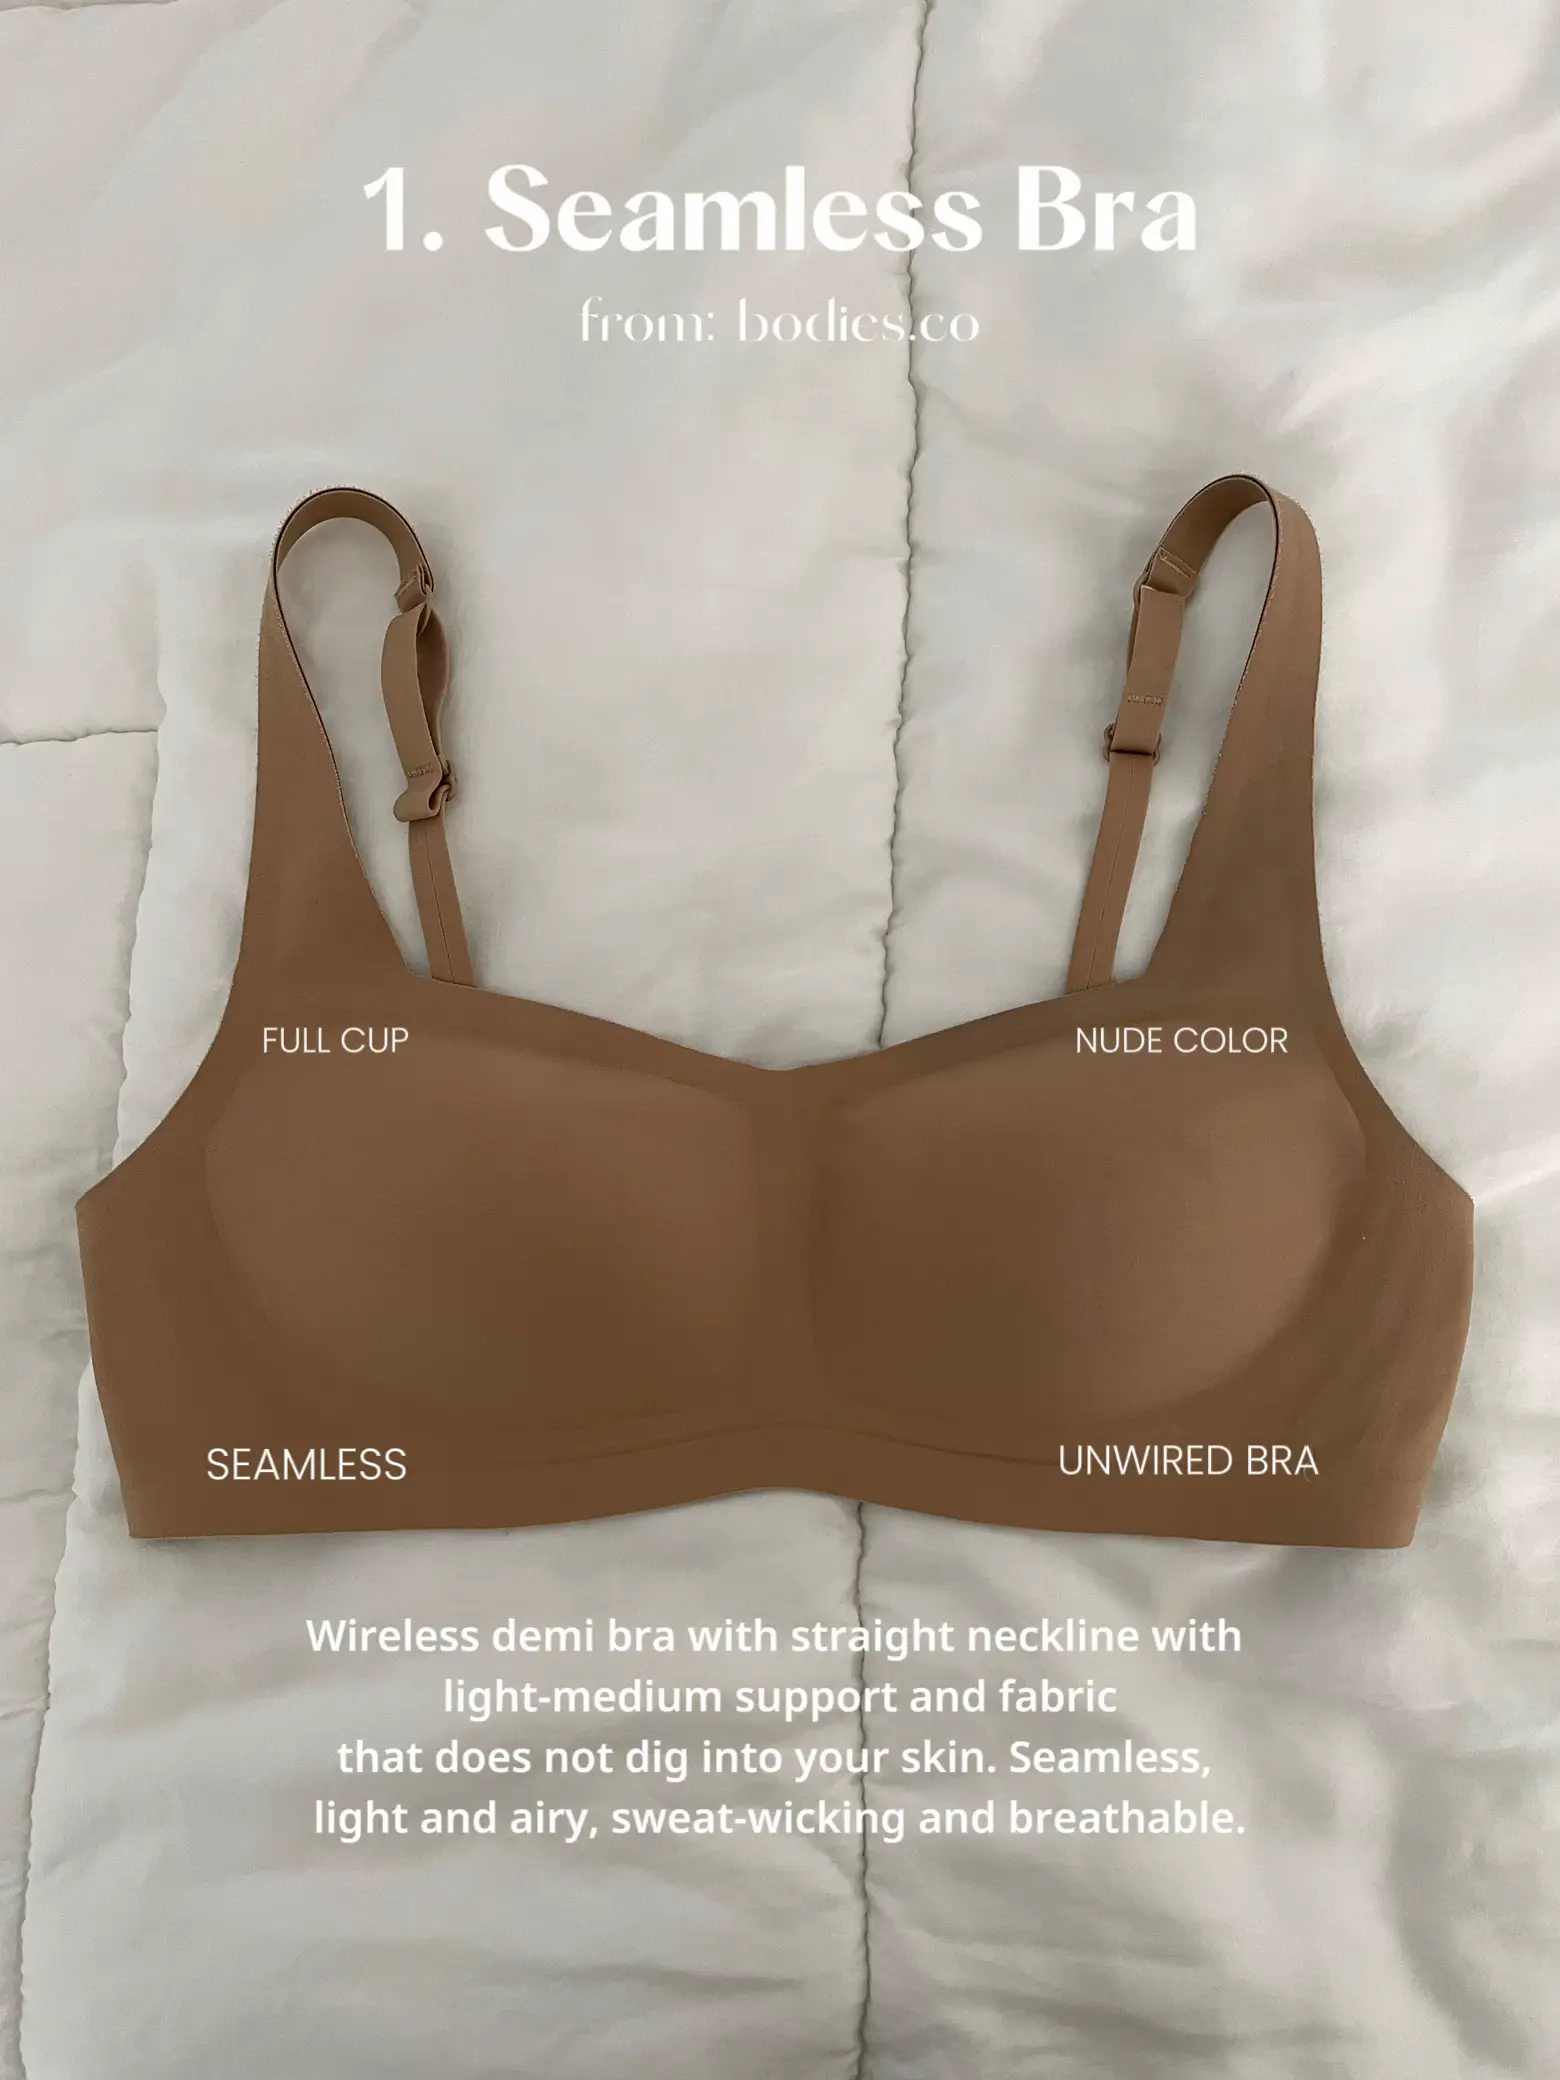 How to machine wash bras without ruining them👙